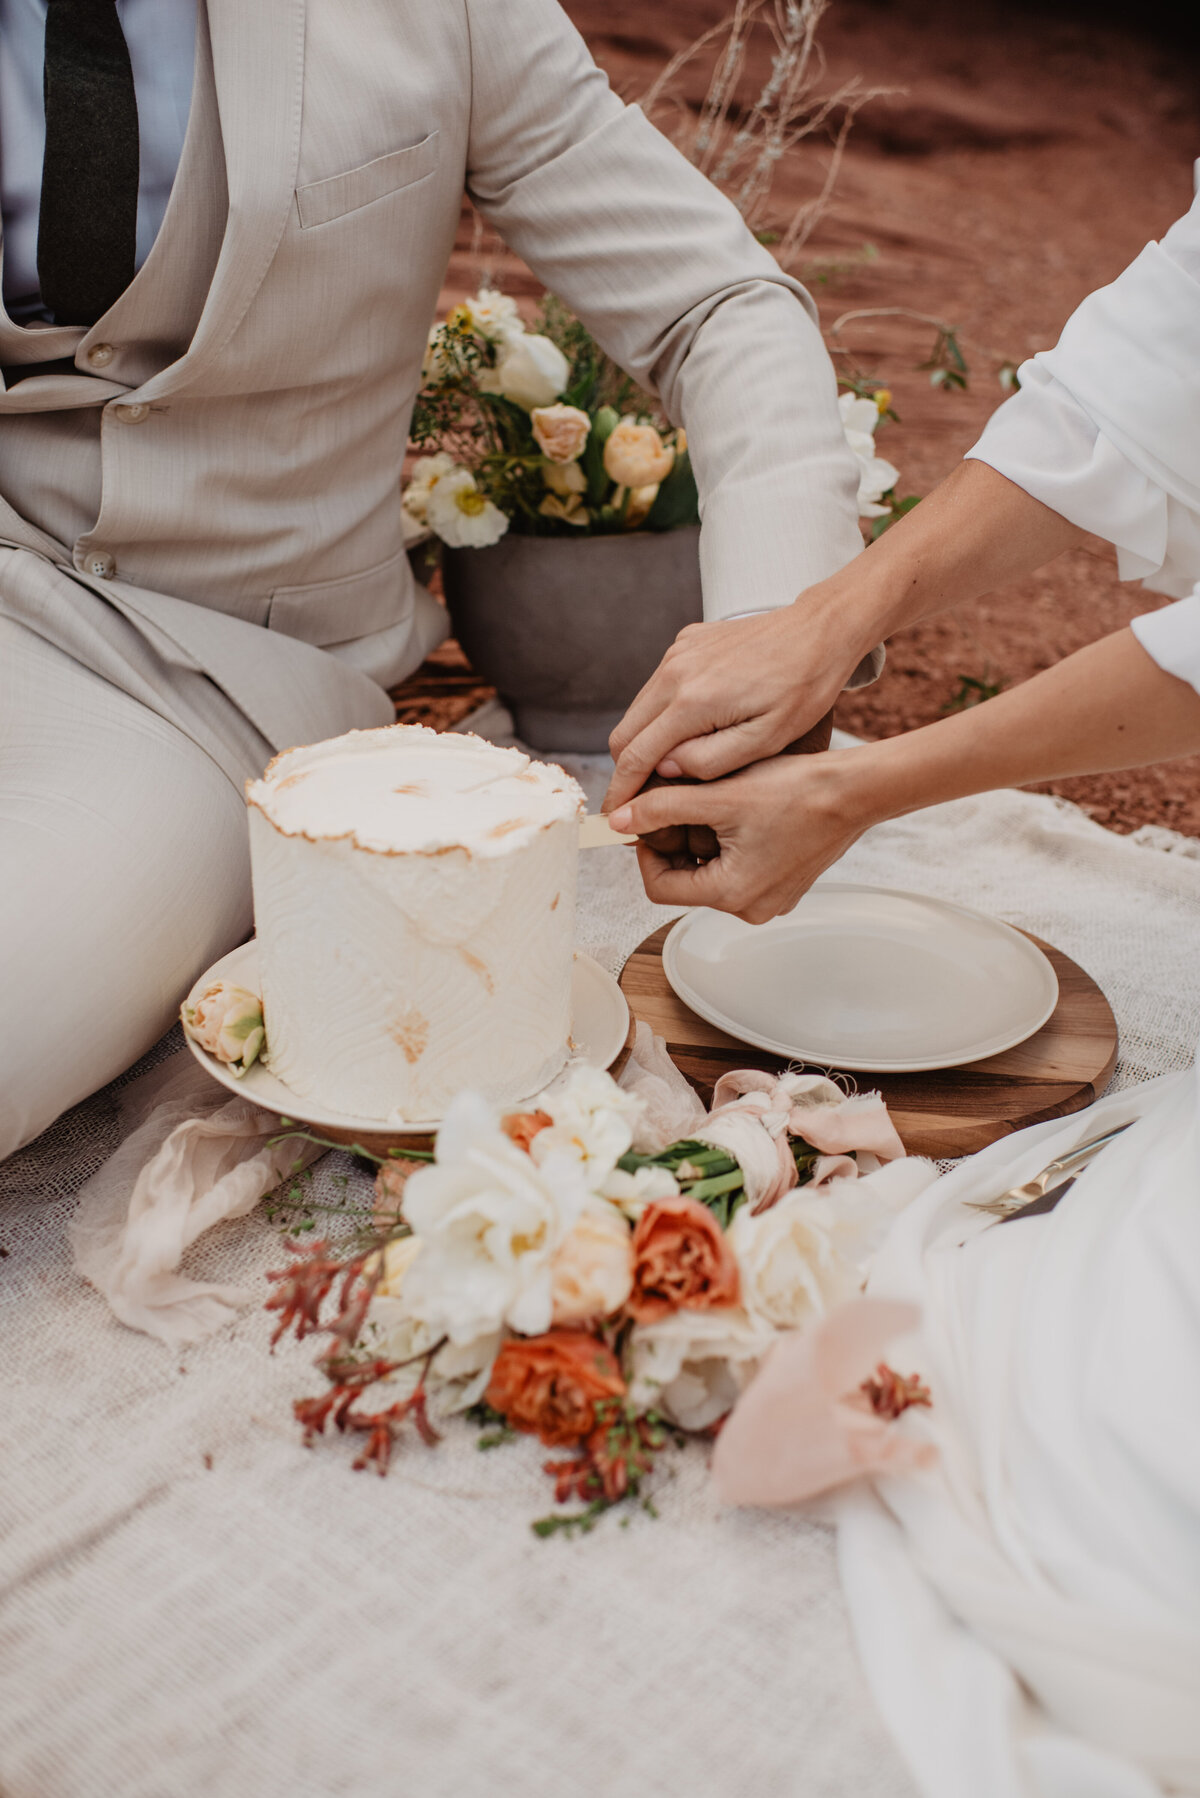 Utah Elopement Photographer captures couple cutting cake after intimate elopement ceremony